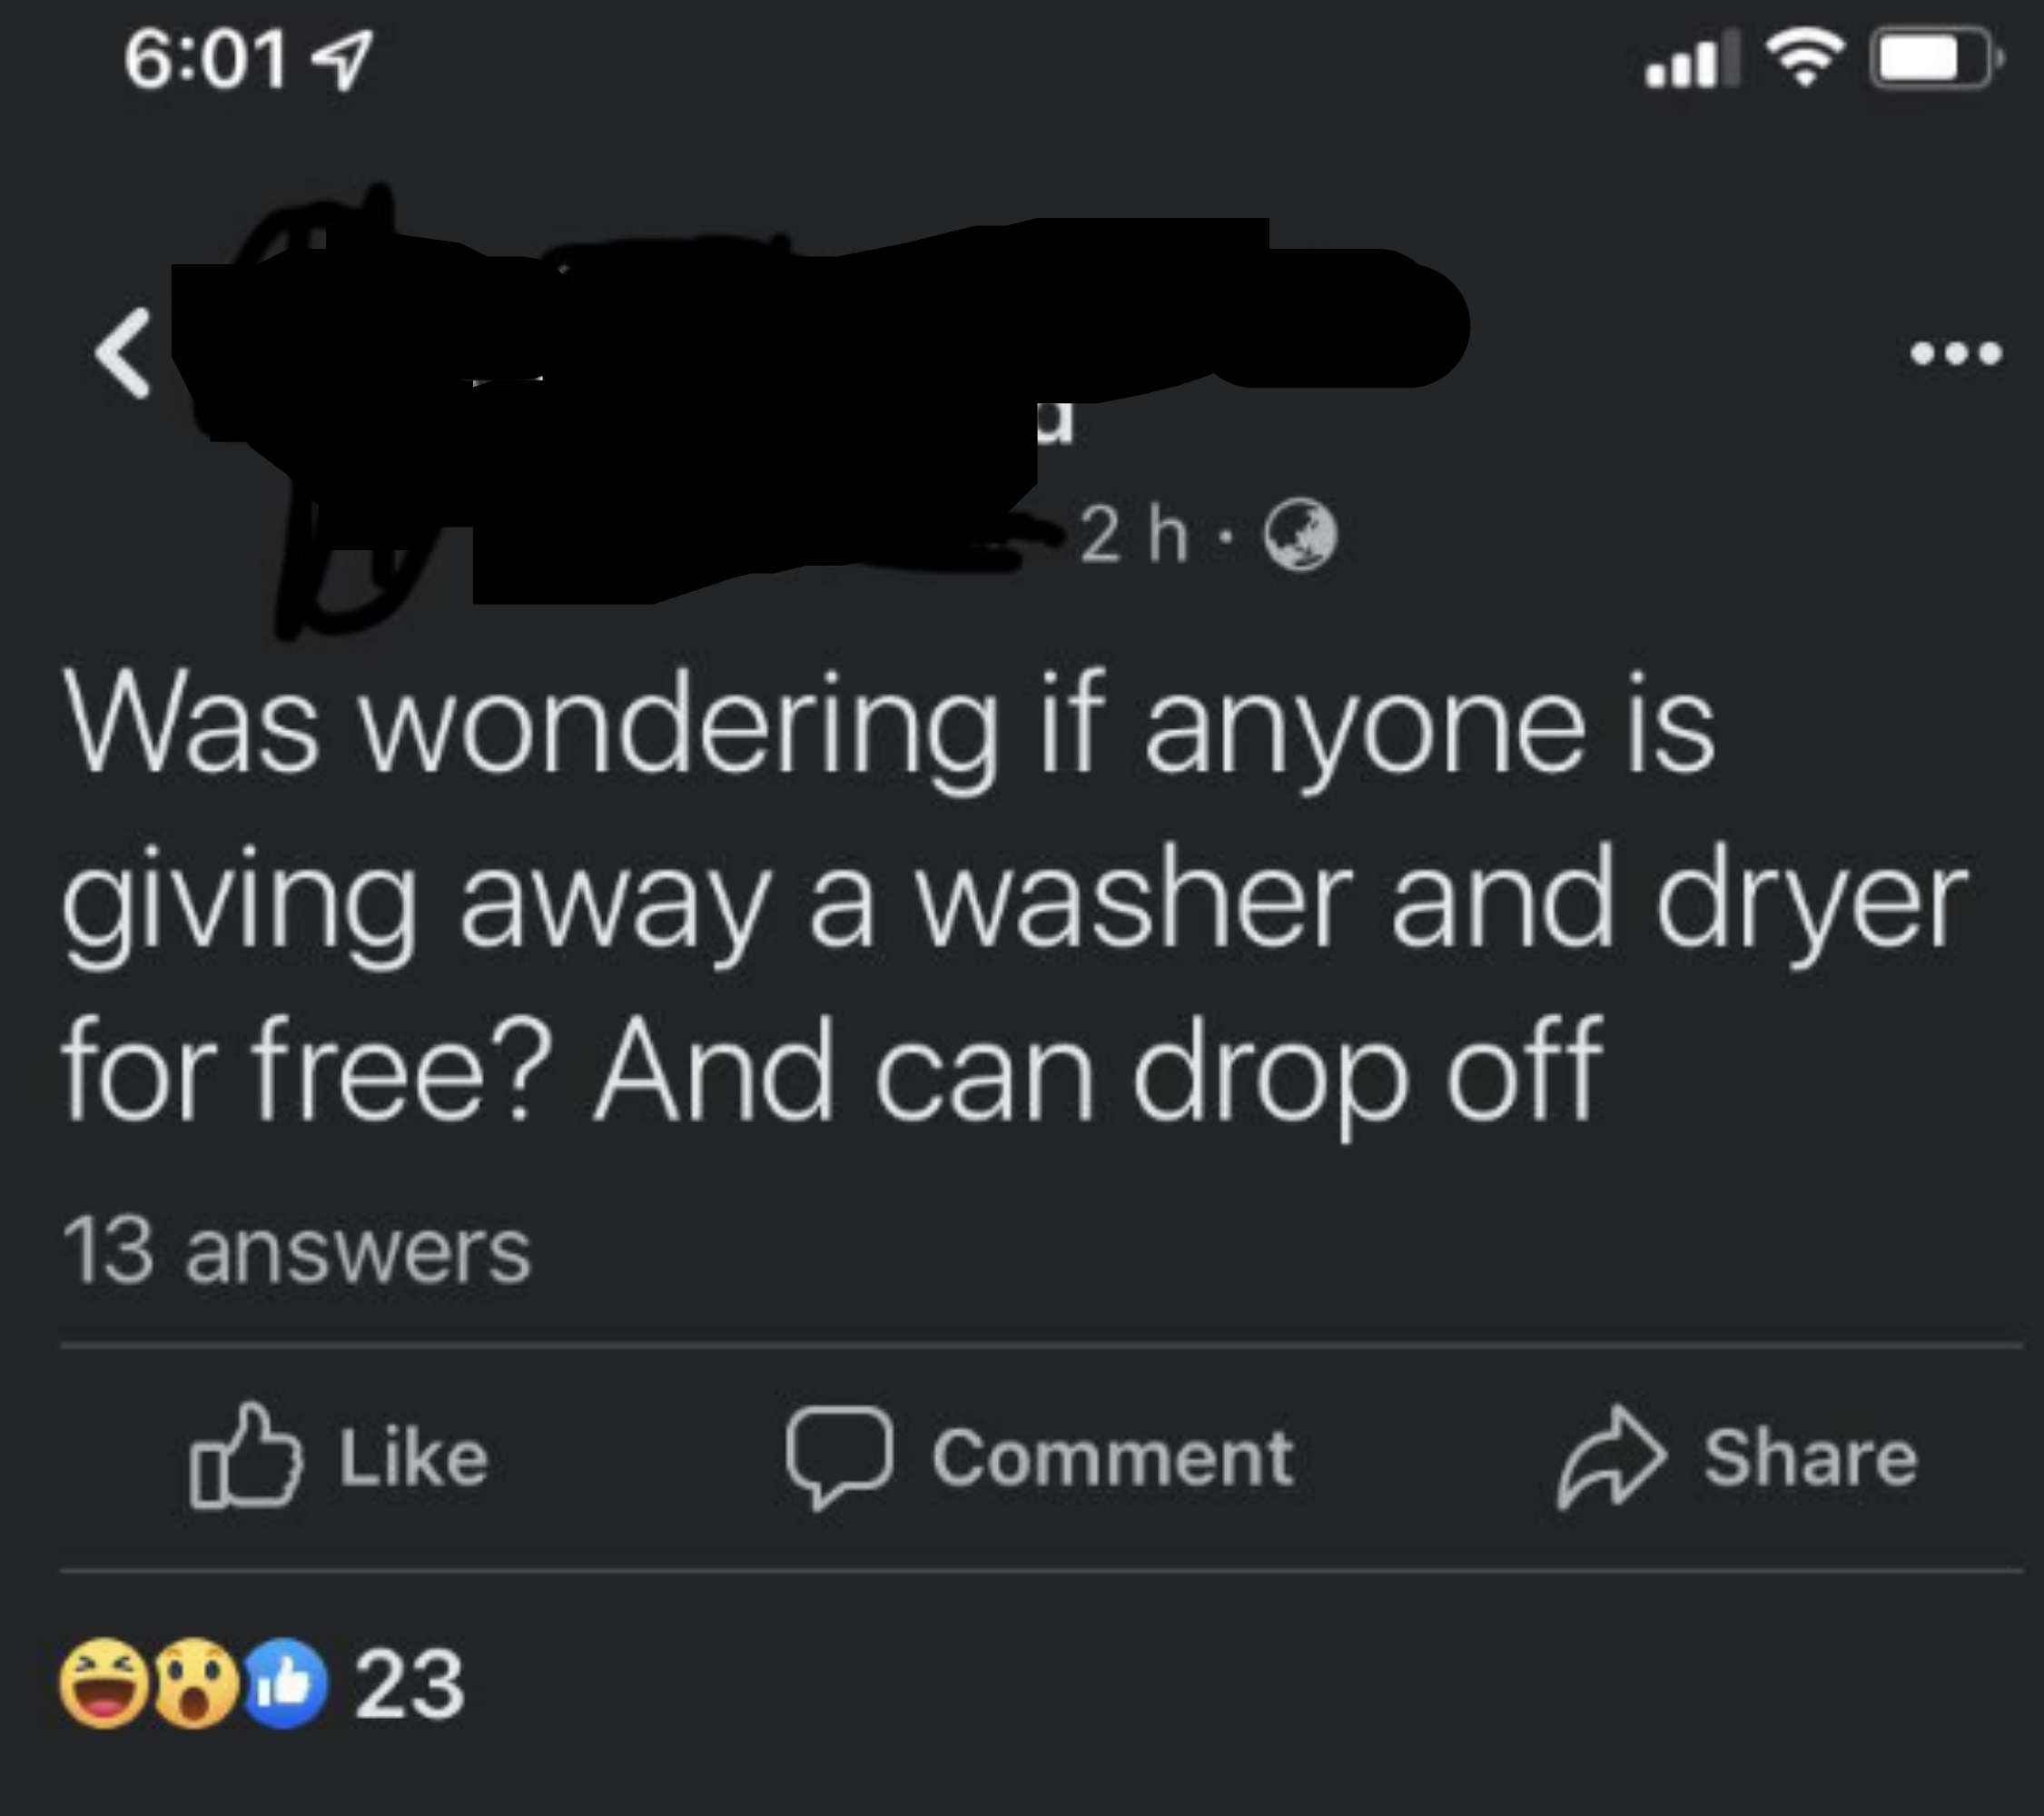 &quot;Was wondering if anyone is giving away a washer and dryer for free? And can drop off&quot;